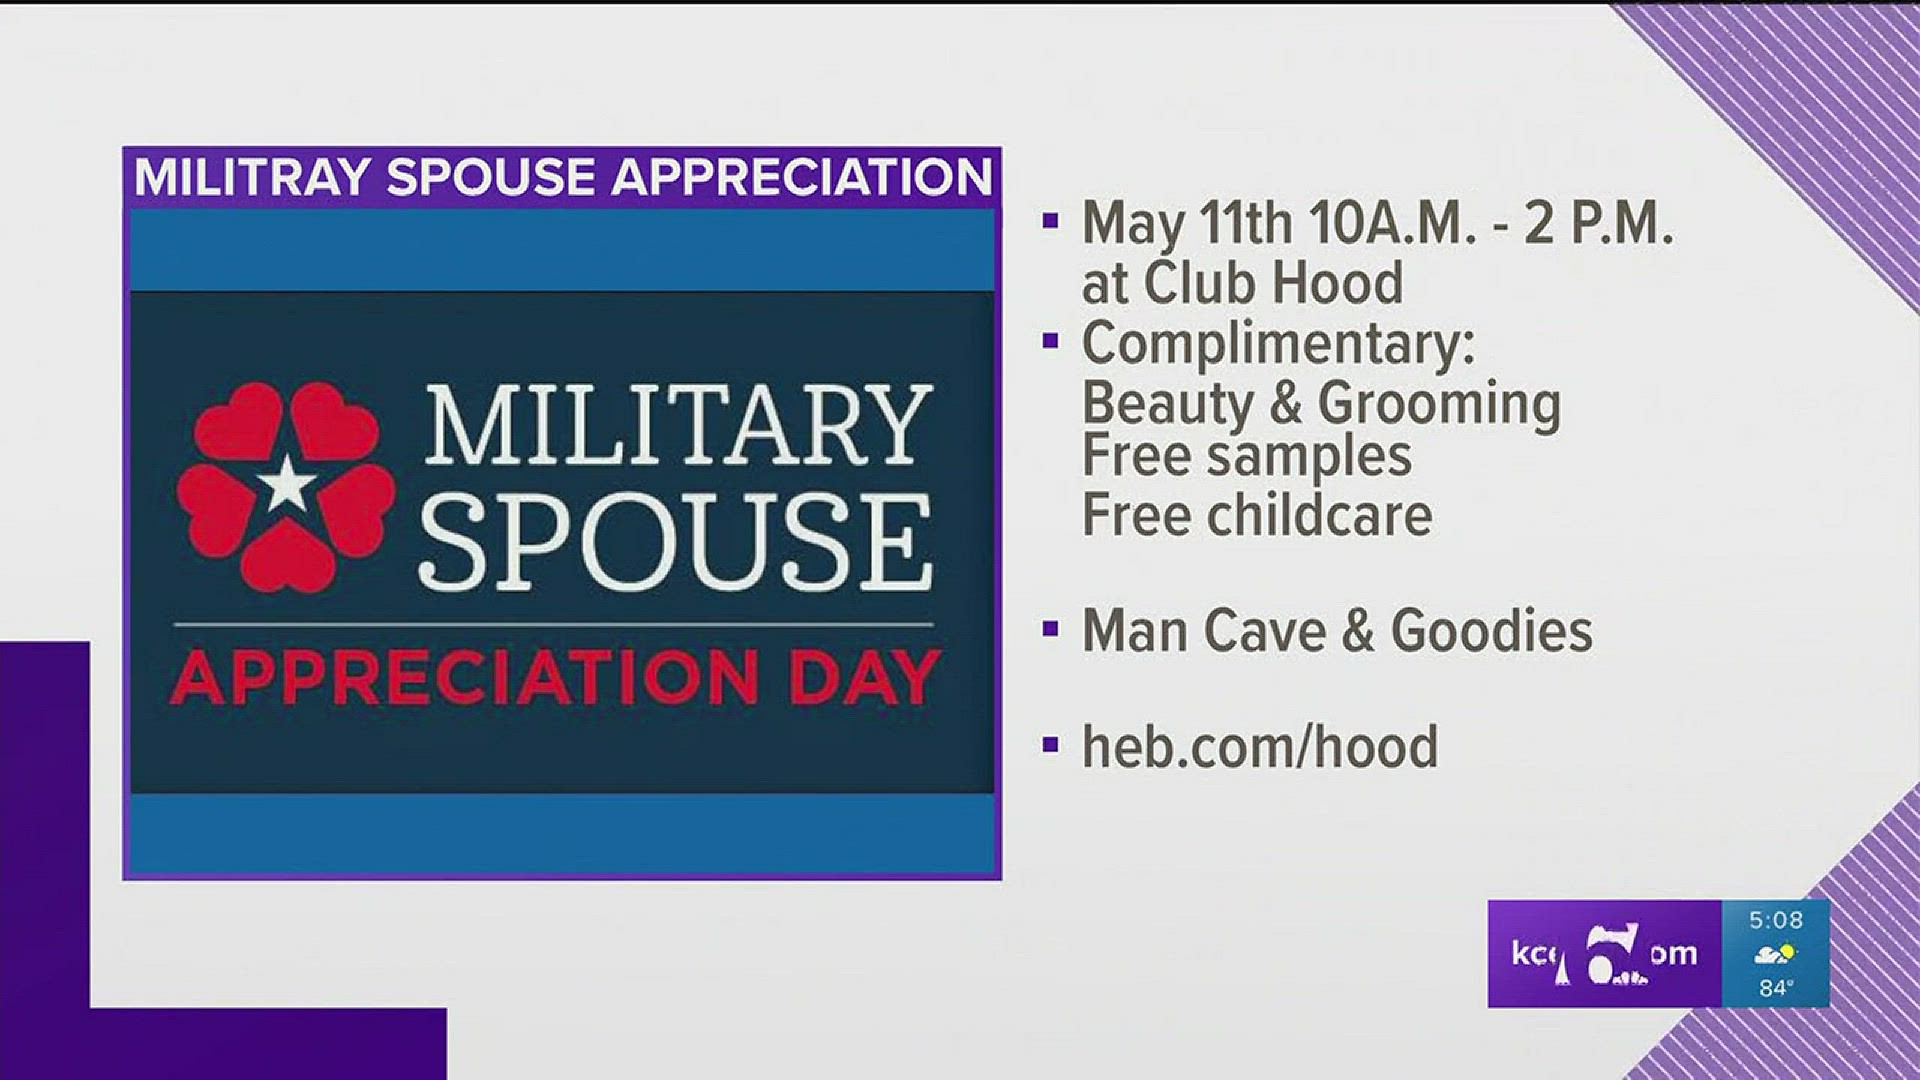 H-E-B is partnering with Fort Hood to honor Military Spouses with a day of pampering.